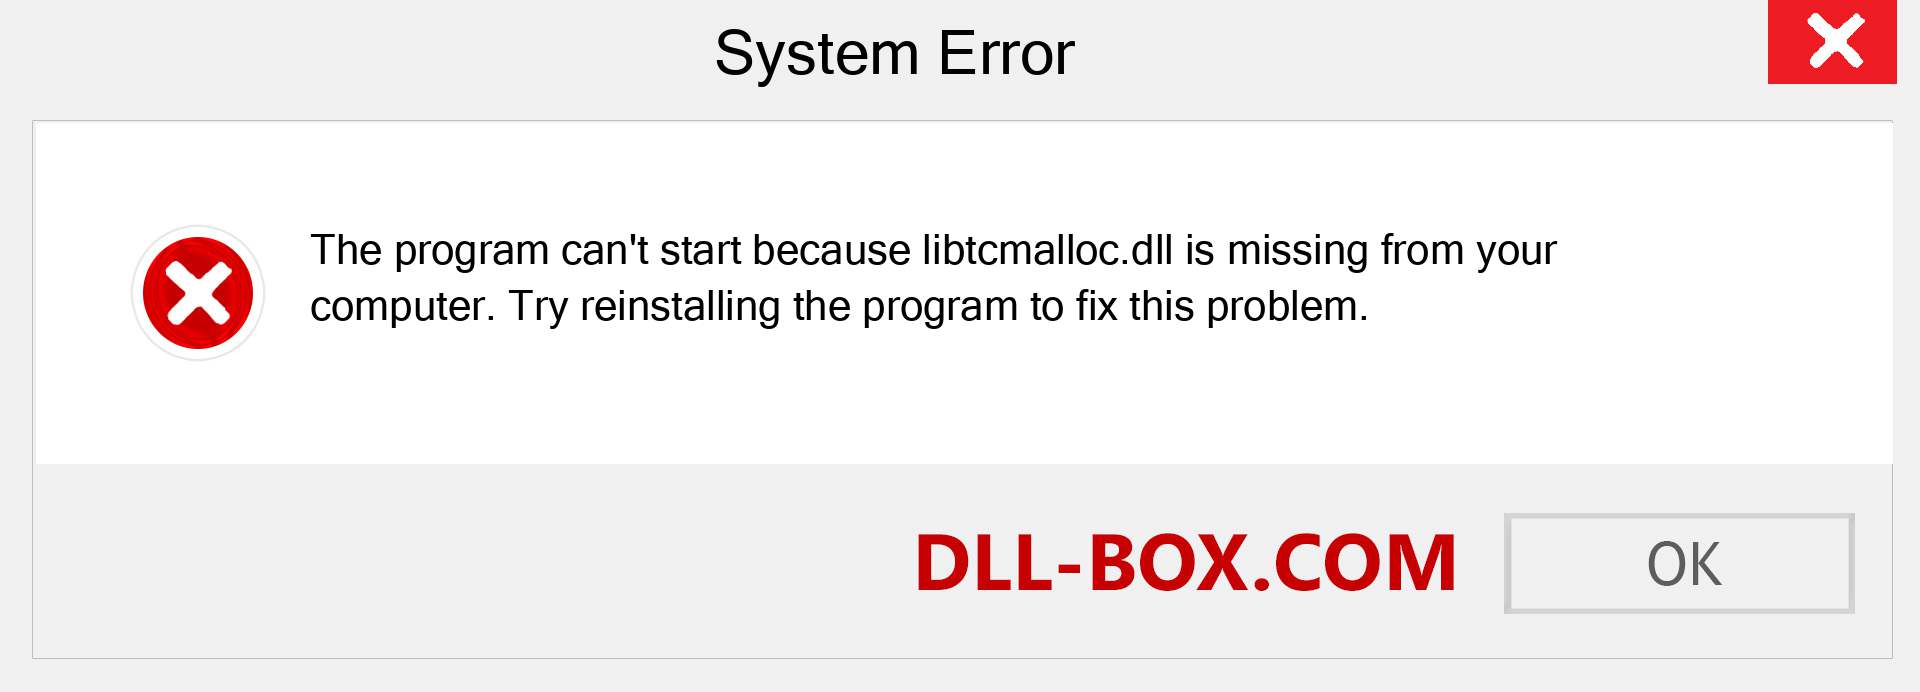  libtcmalloc.dll file is missing?. Download for Windows 7, 8, 10 - Fix  libtcmalloc dll Missing Error on Windows, photos, images